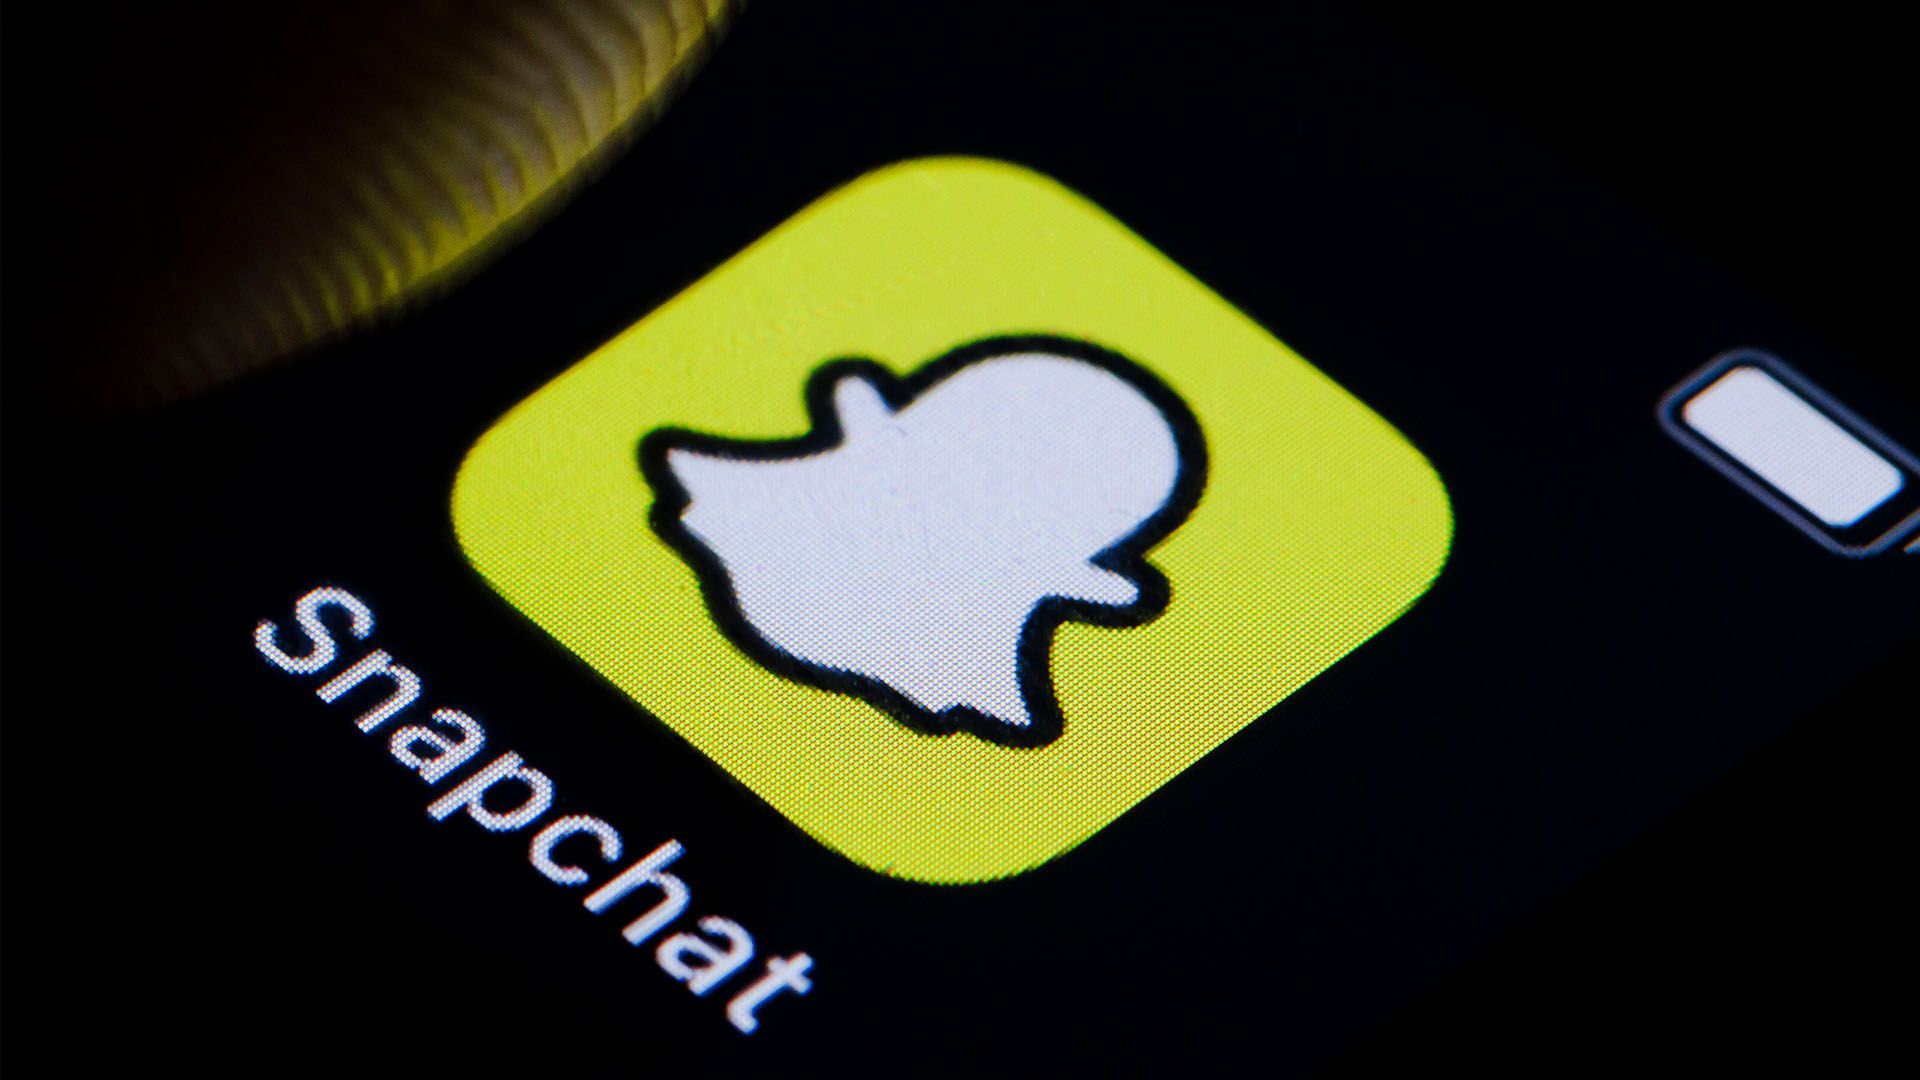 Snapchat has 363 million daily active users worldwide